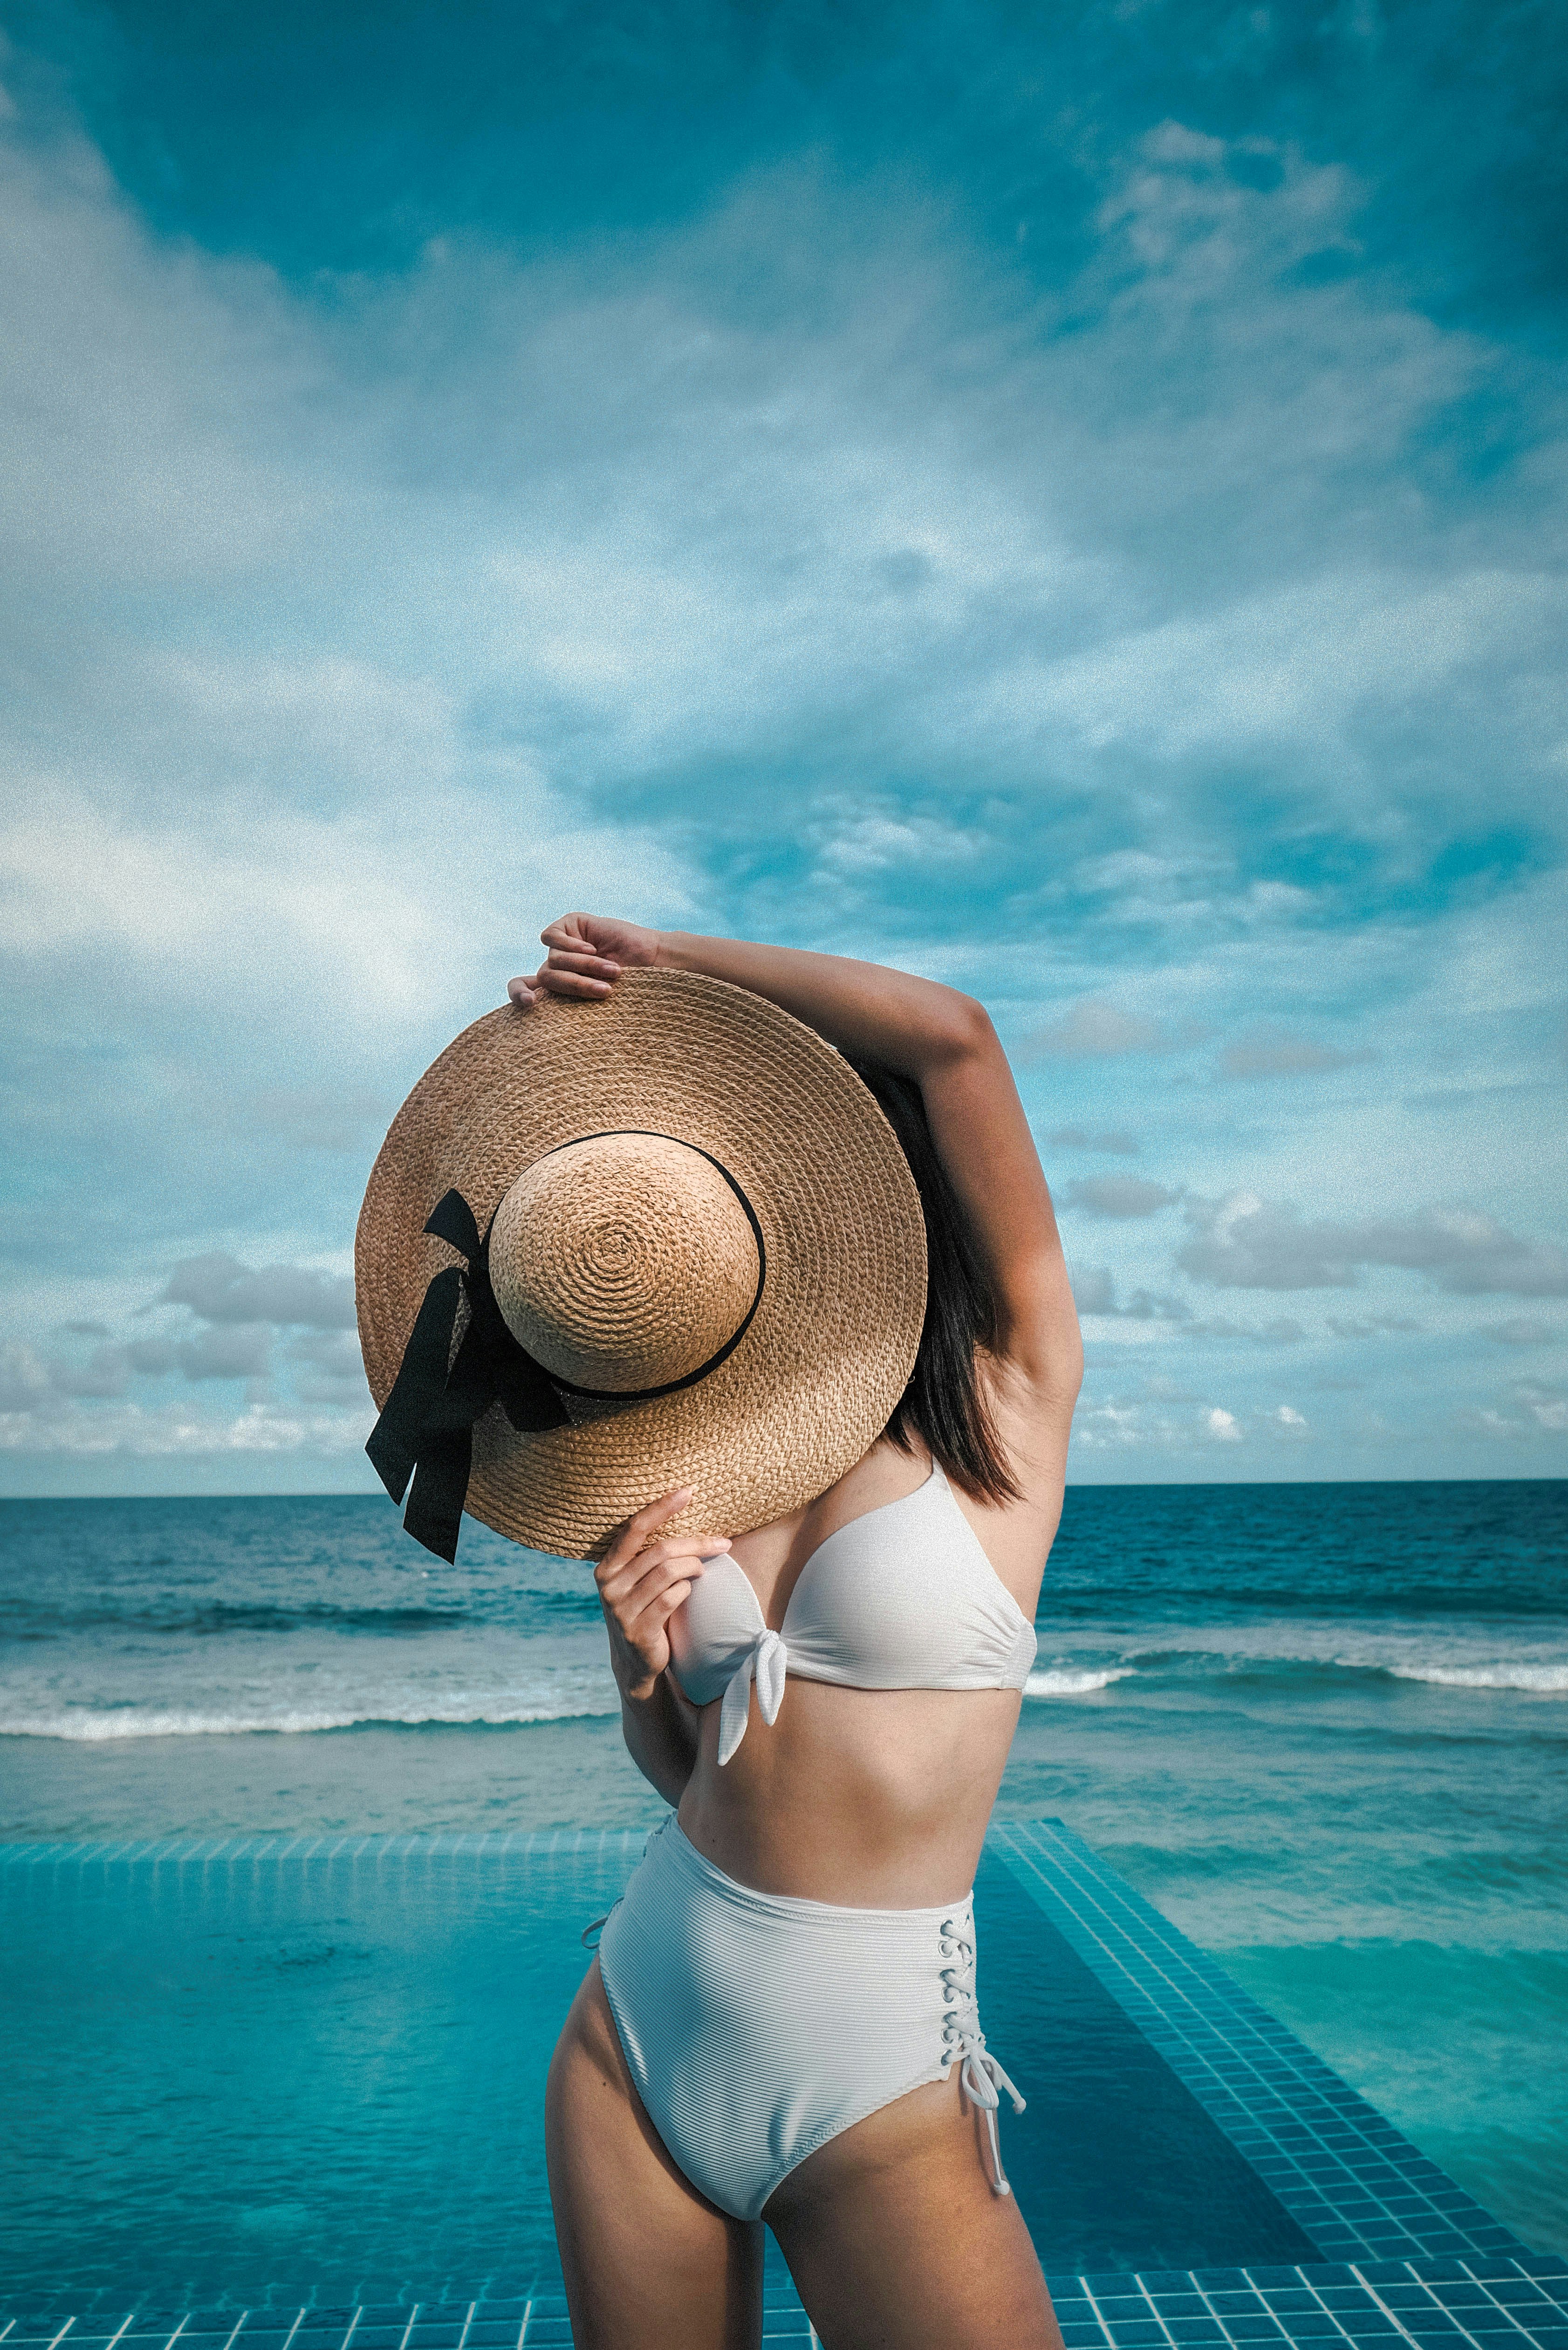 500+ Swimsuit Pictures HD Download Free Images and Stock Photos on Unsplash pic